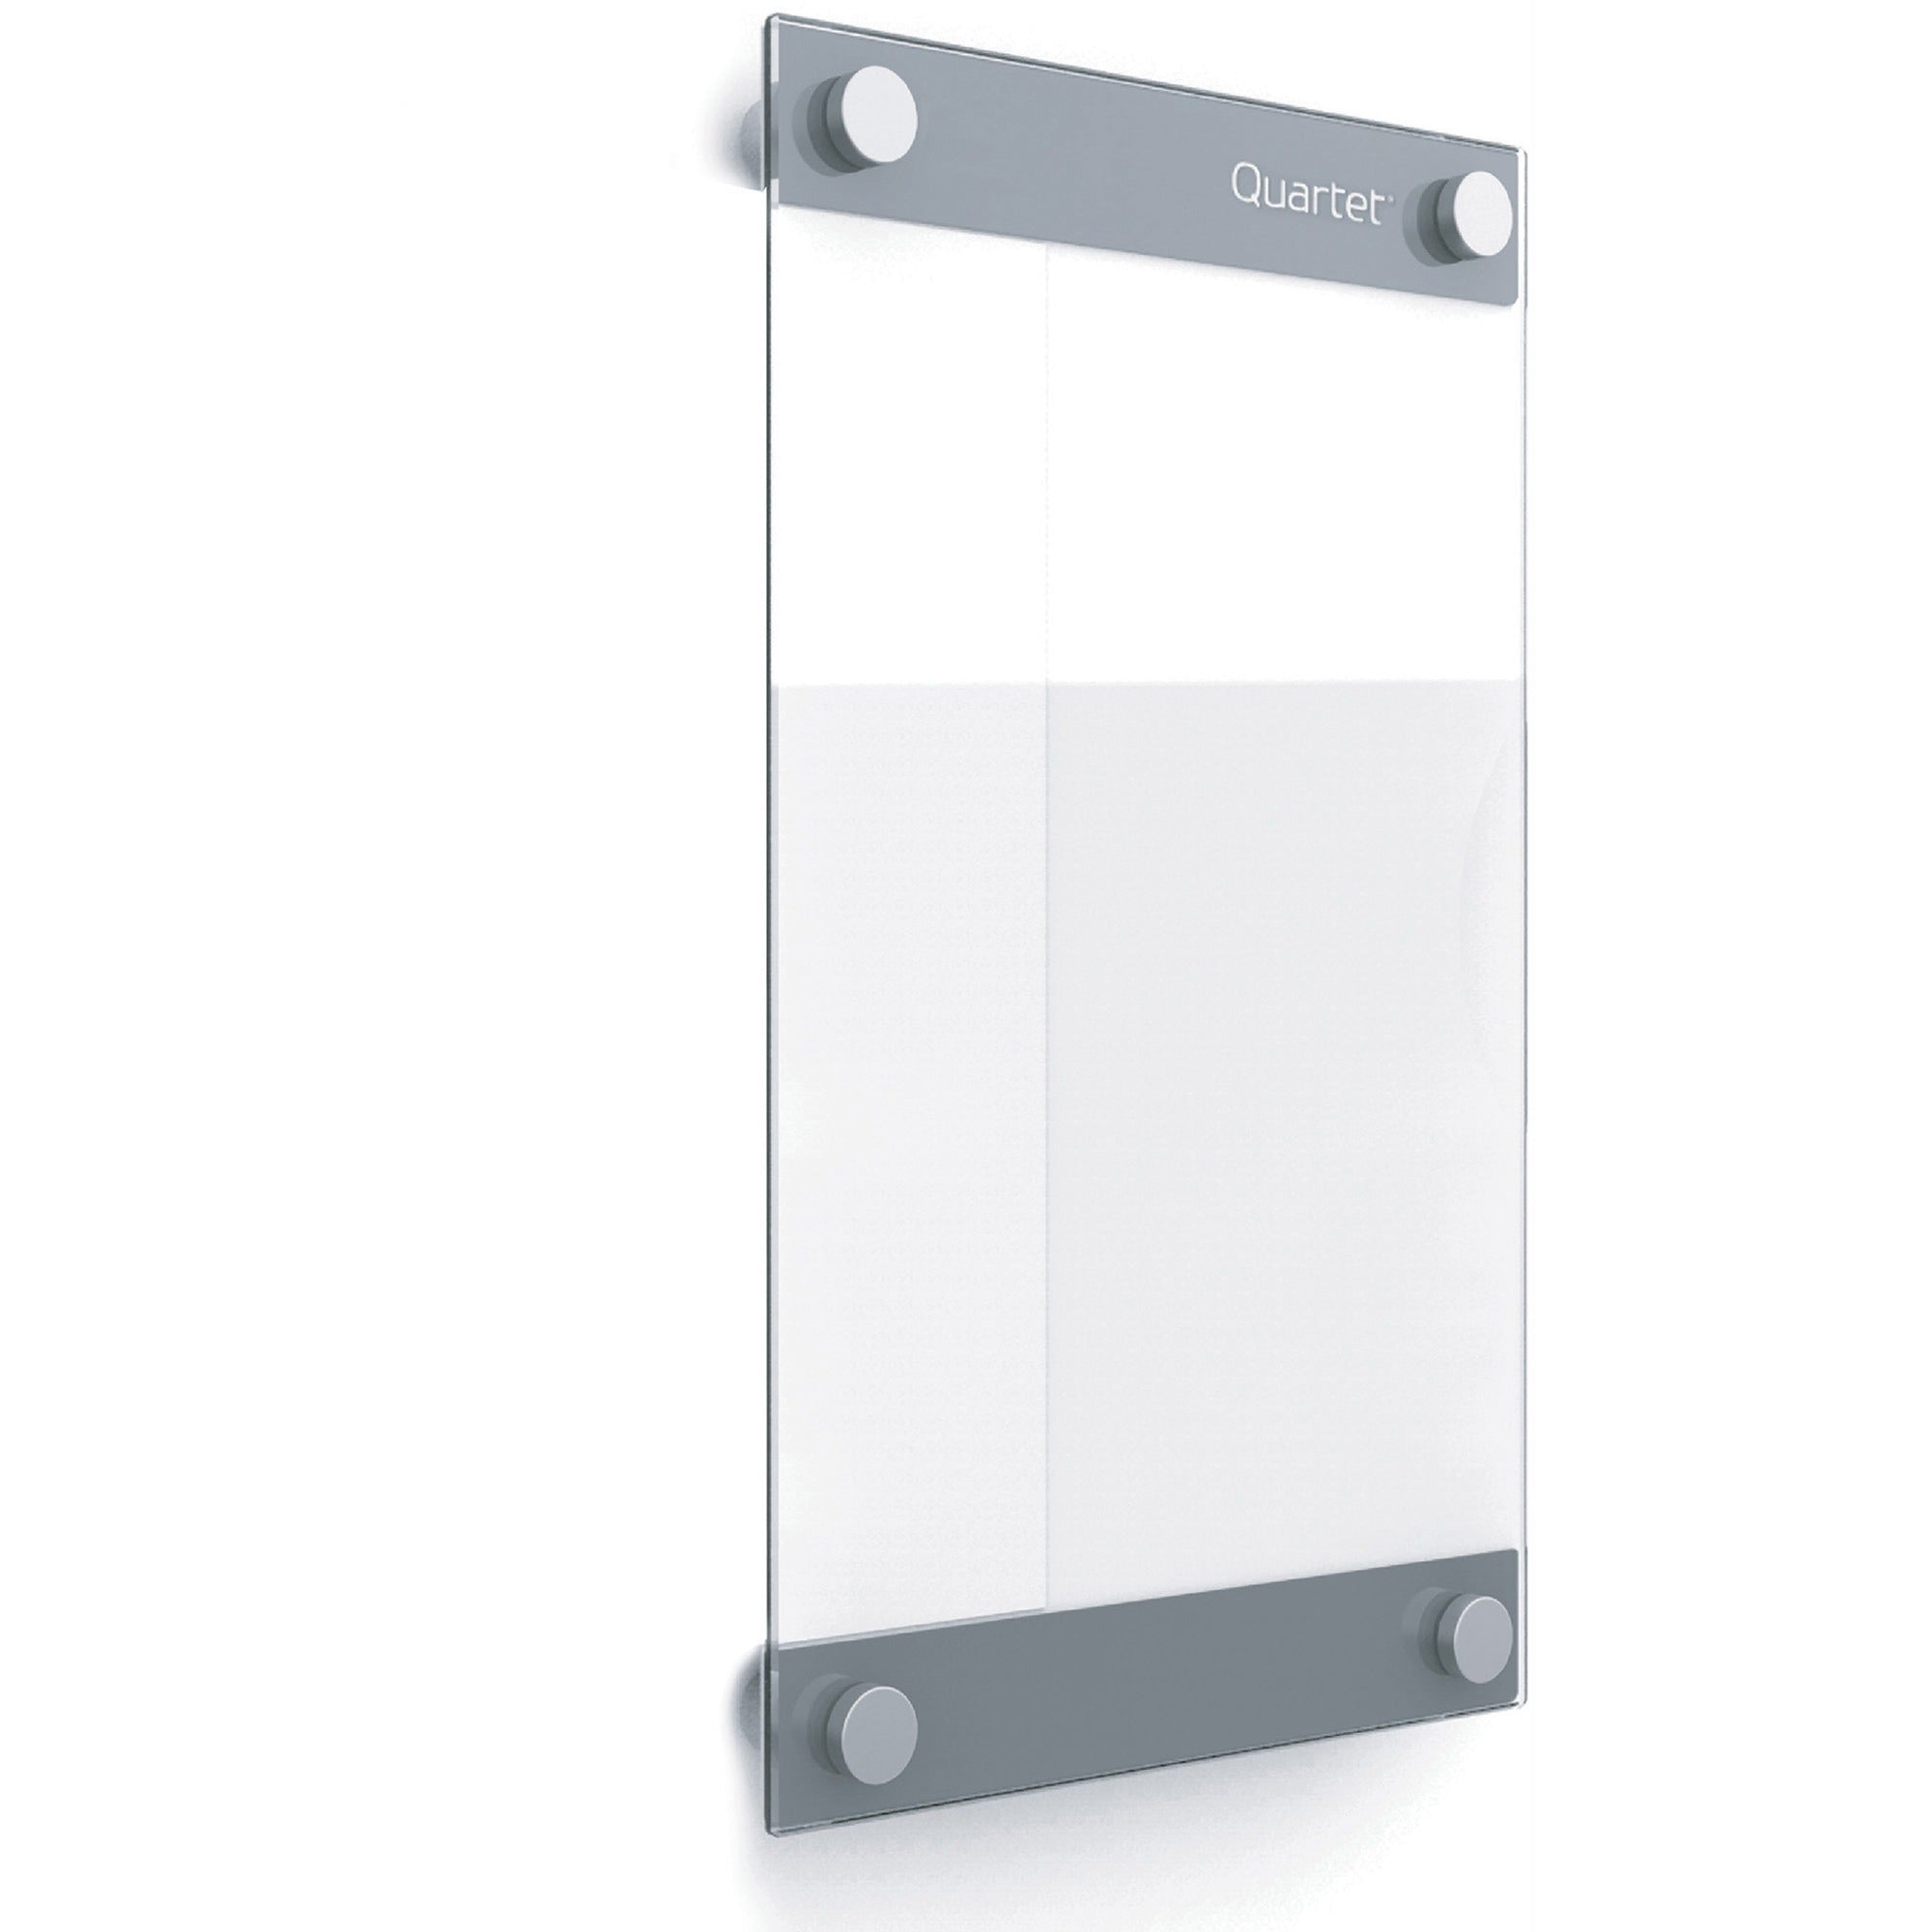 quartet-infinity-customizable-glass-dry-erase-board-85-07-ft-width-x-11-09-ft-height-clear-white-glass-surface-rectangle-horizontal-vertical-magnetic-assembly-required-1-each_qrtgi8511 - 1